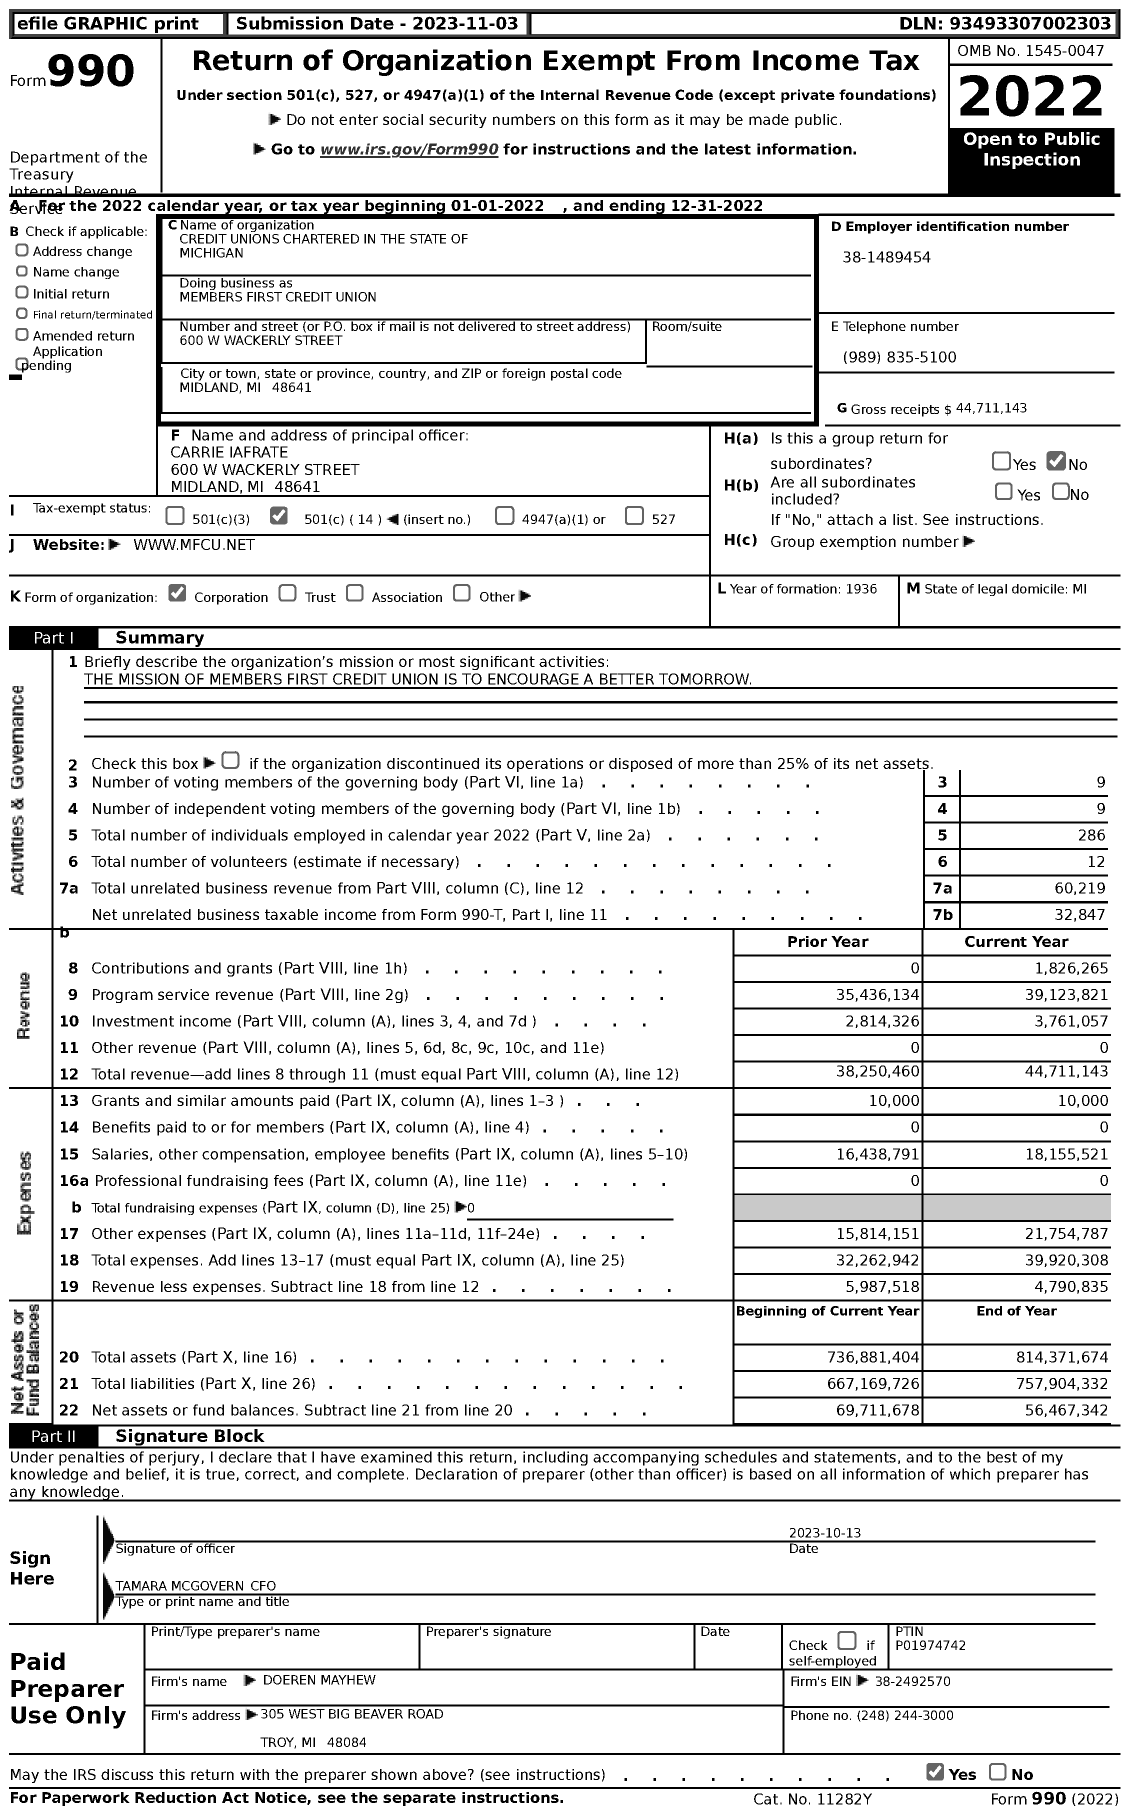 Image of first page of 2022 Form 990 for CREDIT UNIONS CHARTERED IN THE STATE OF Michigan - 126 Members First CREDIT Union (MFCU)